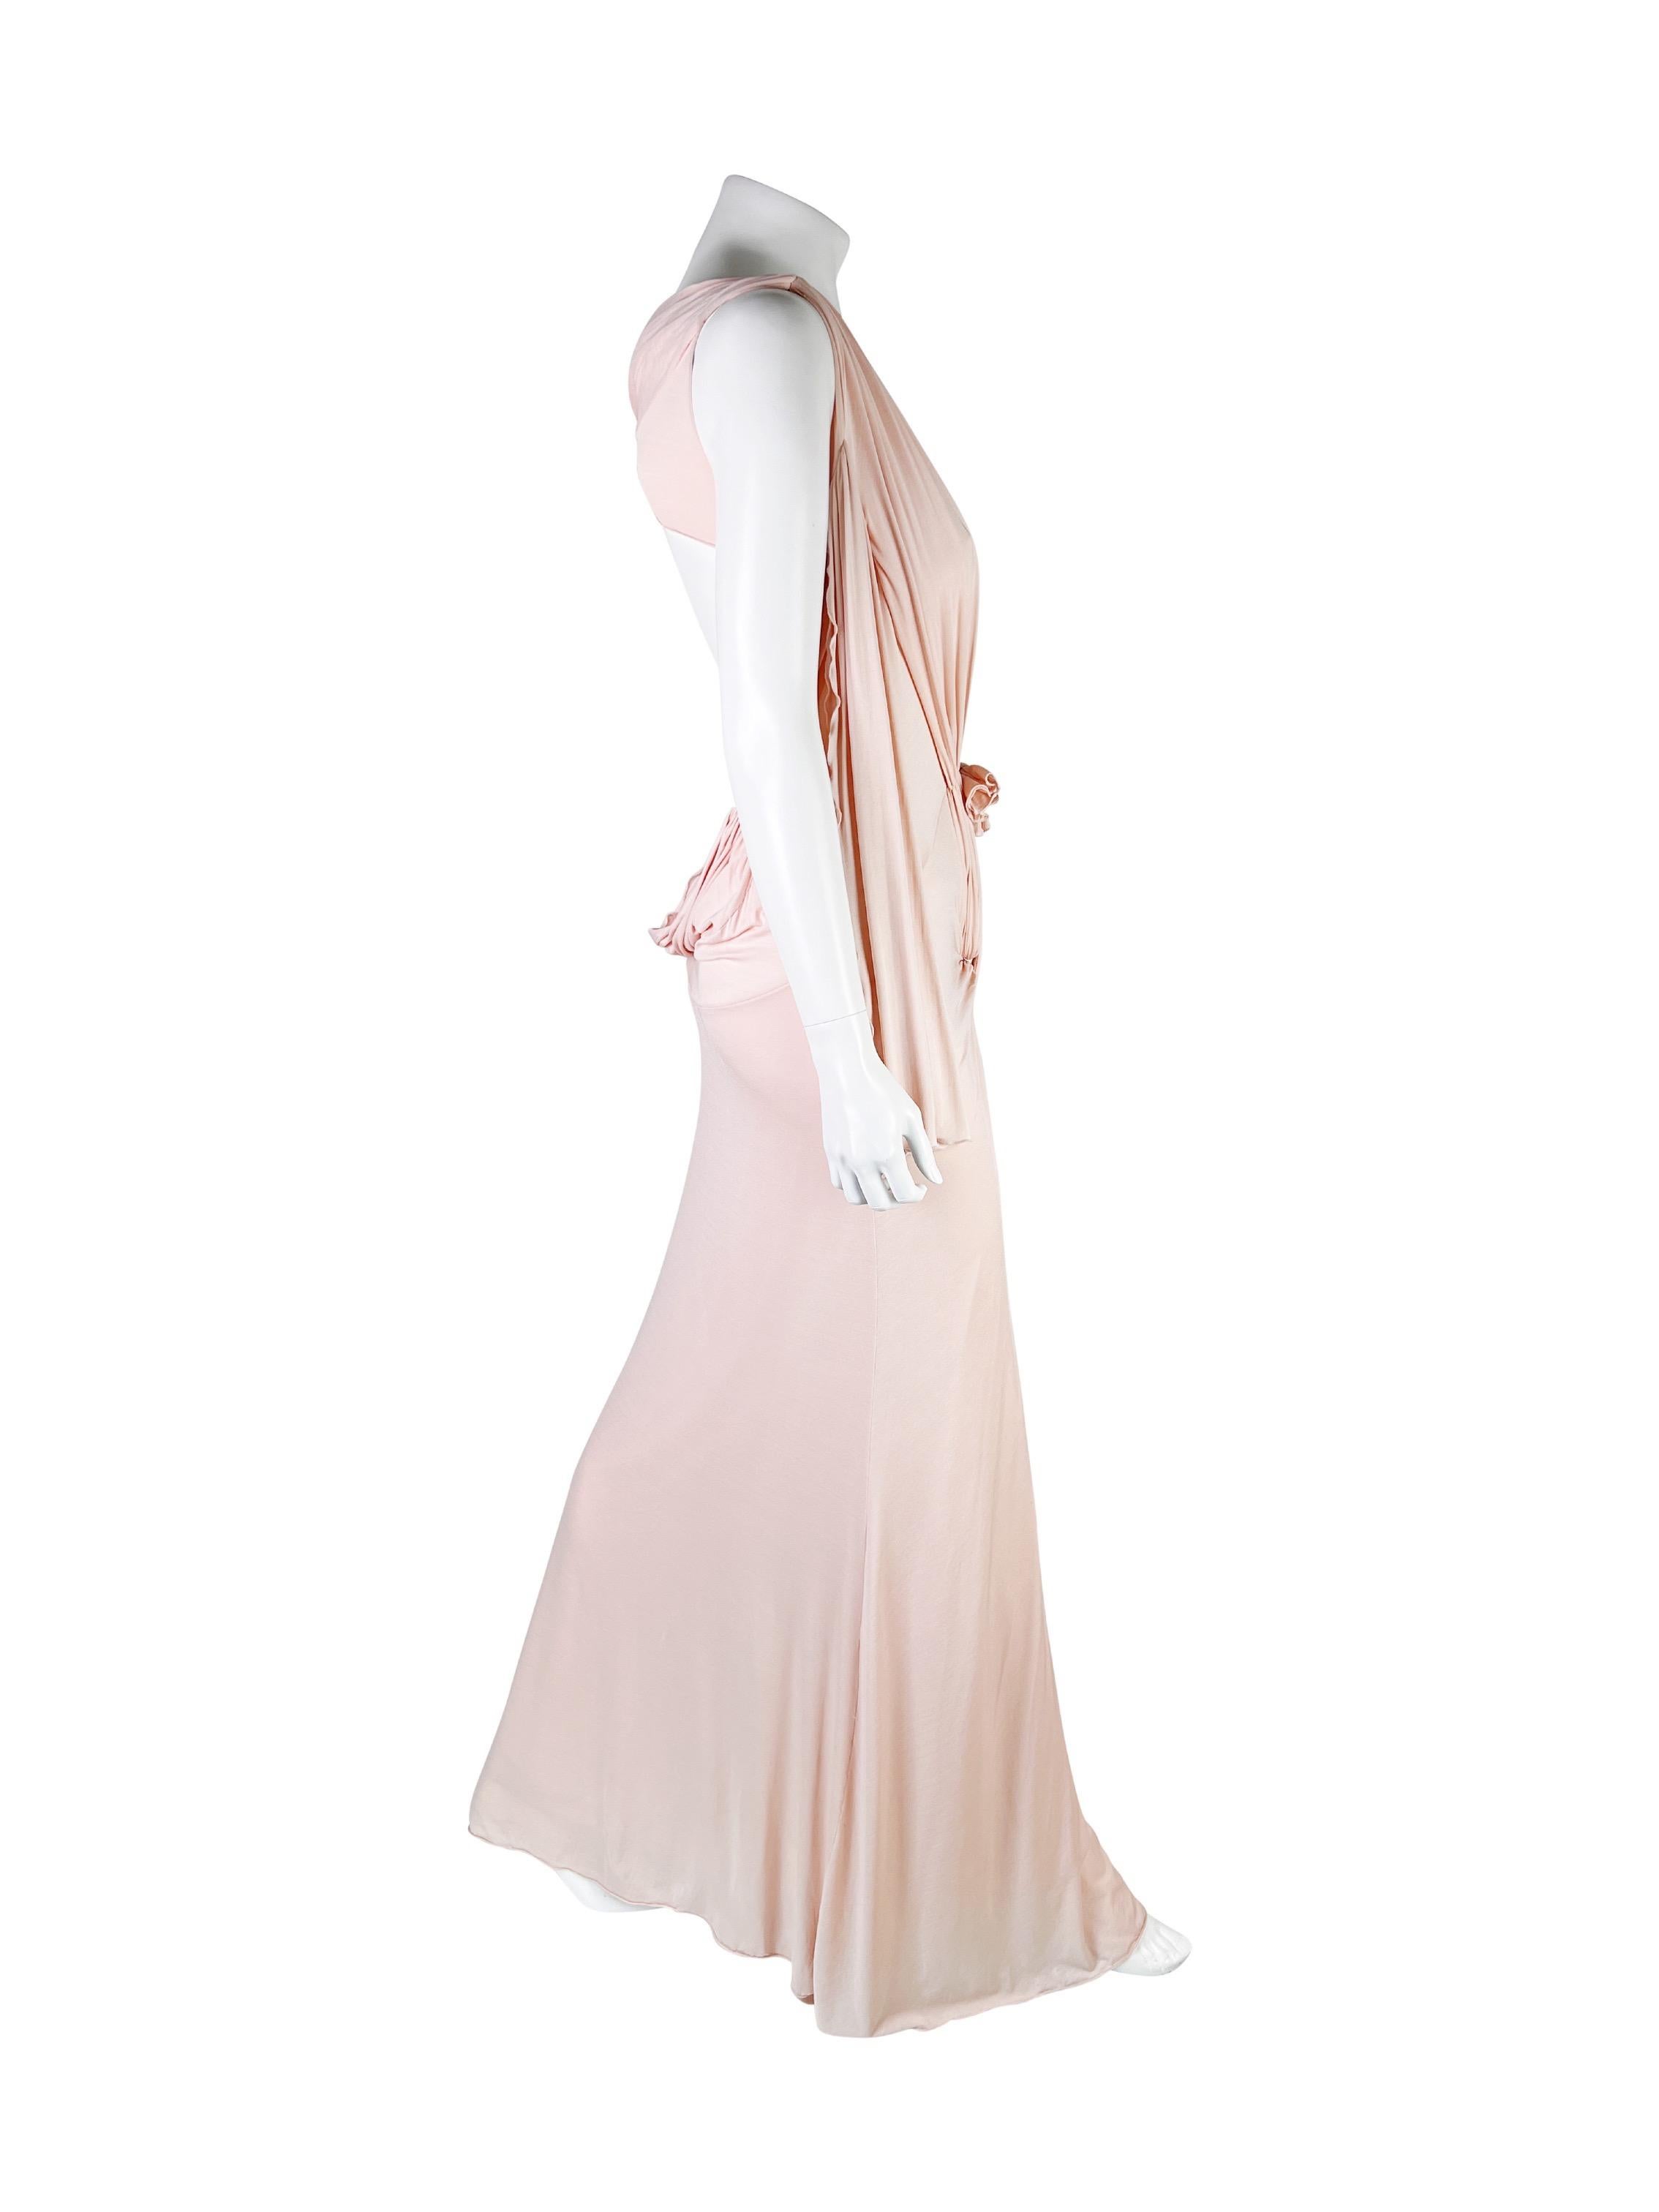 Women's Dior by John Galliano Spring 2003 RTW Jersey Gown